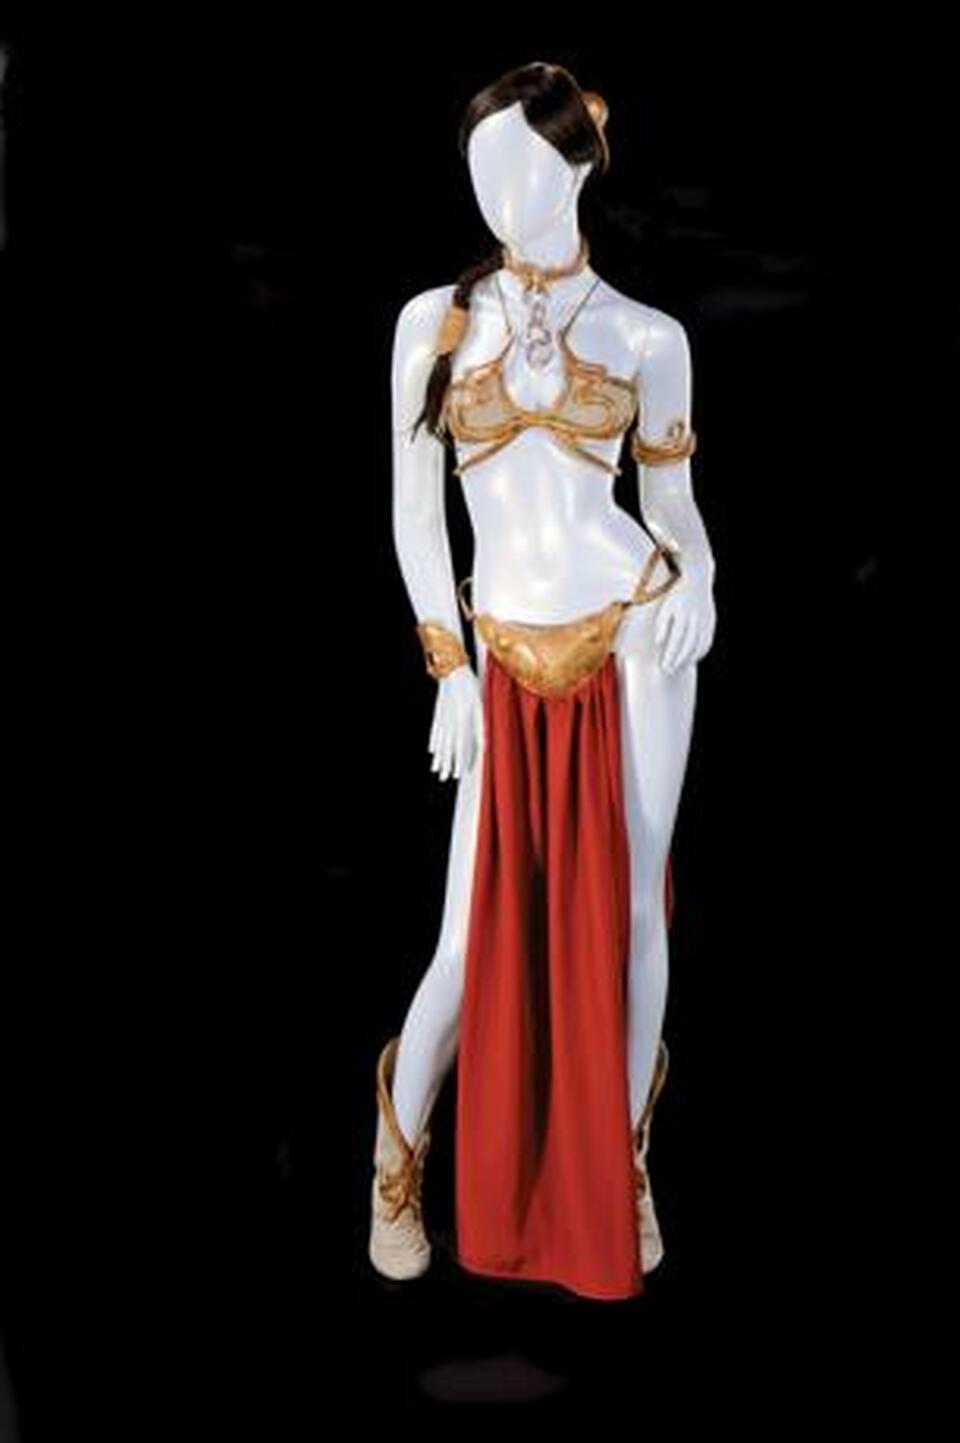 The Princess Leia slave costume worn by actress Carrie Fisher in "Star Wars Episode VI: Return of the Jedi" is shown in this handout photo released to Reuters September 16, 2015. (Reuters Photo/Profiles in History/Handout via Reuters)